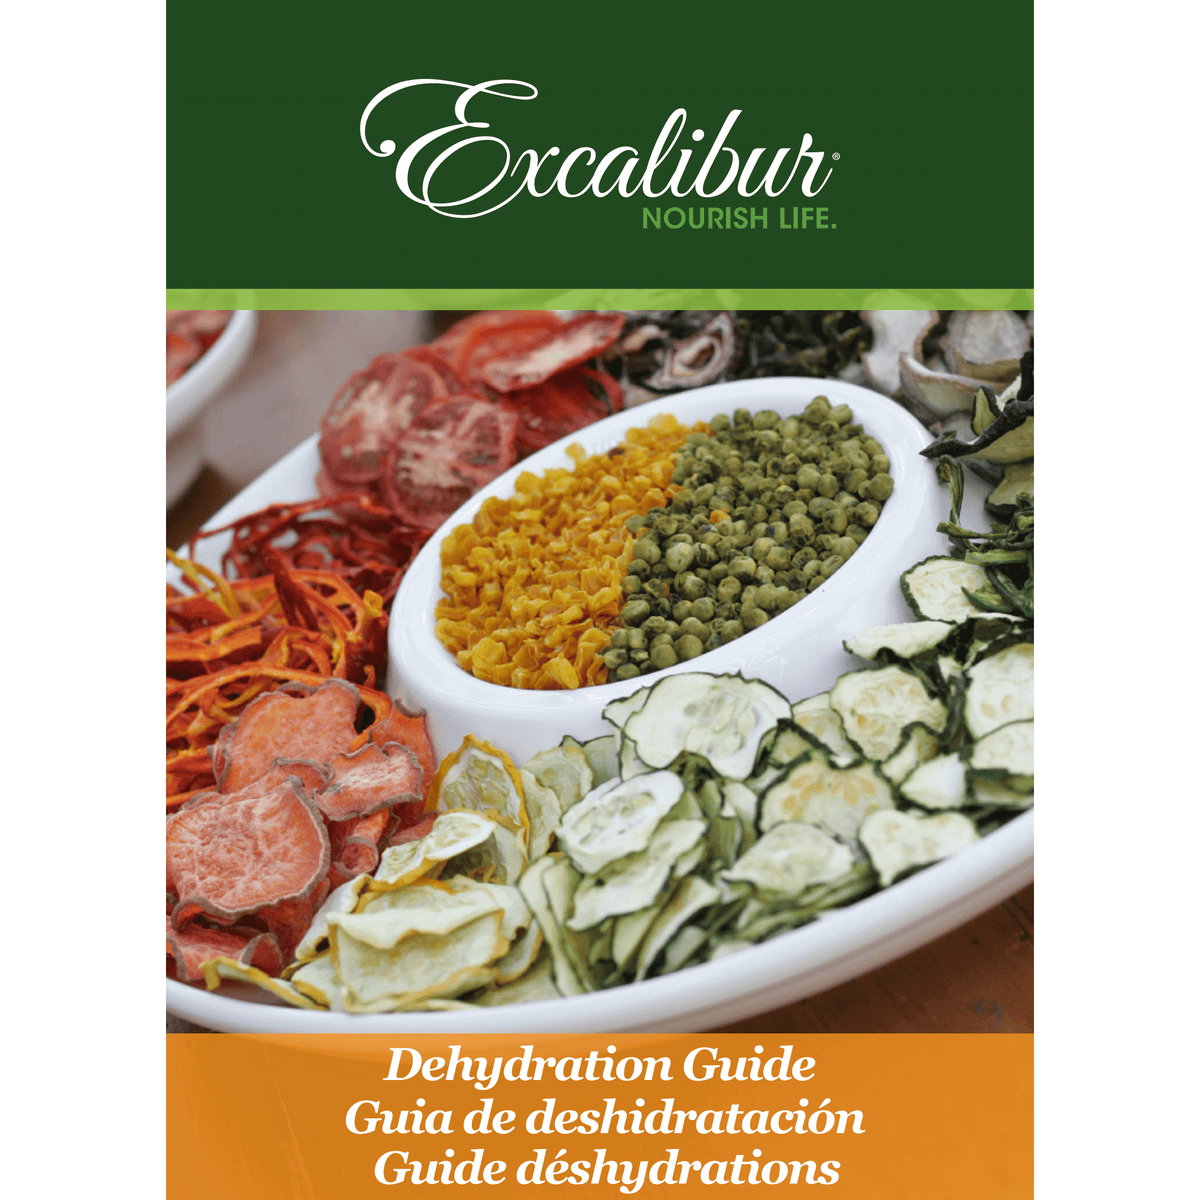 Excalibur dehydrator operation manual for analogue models.